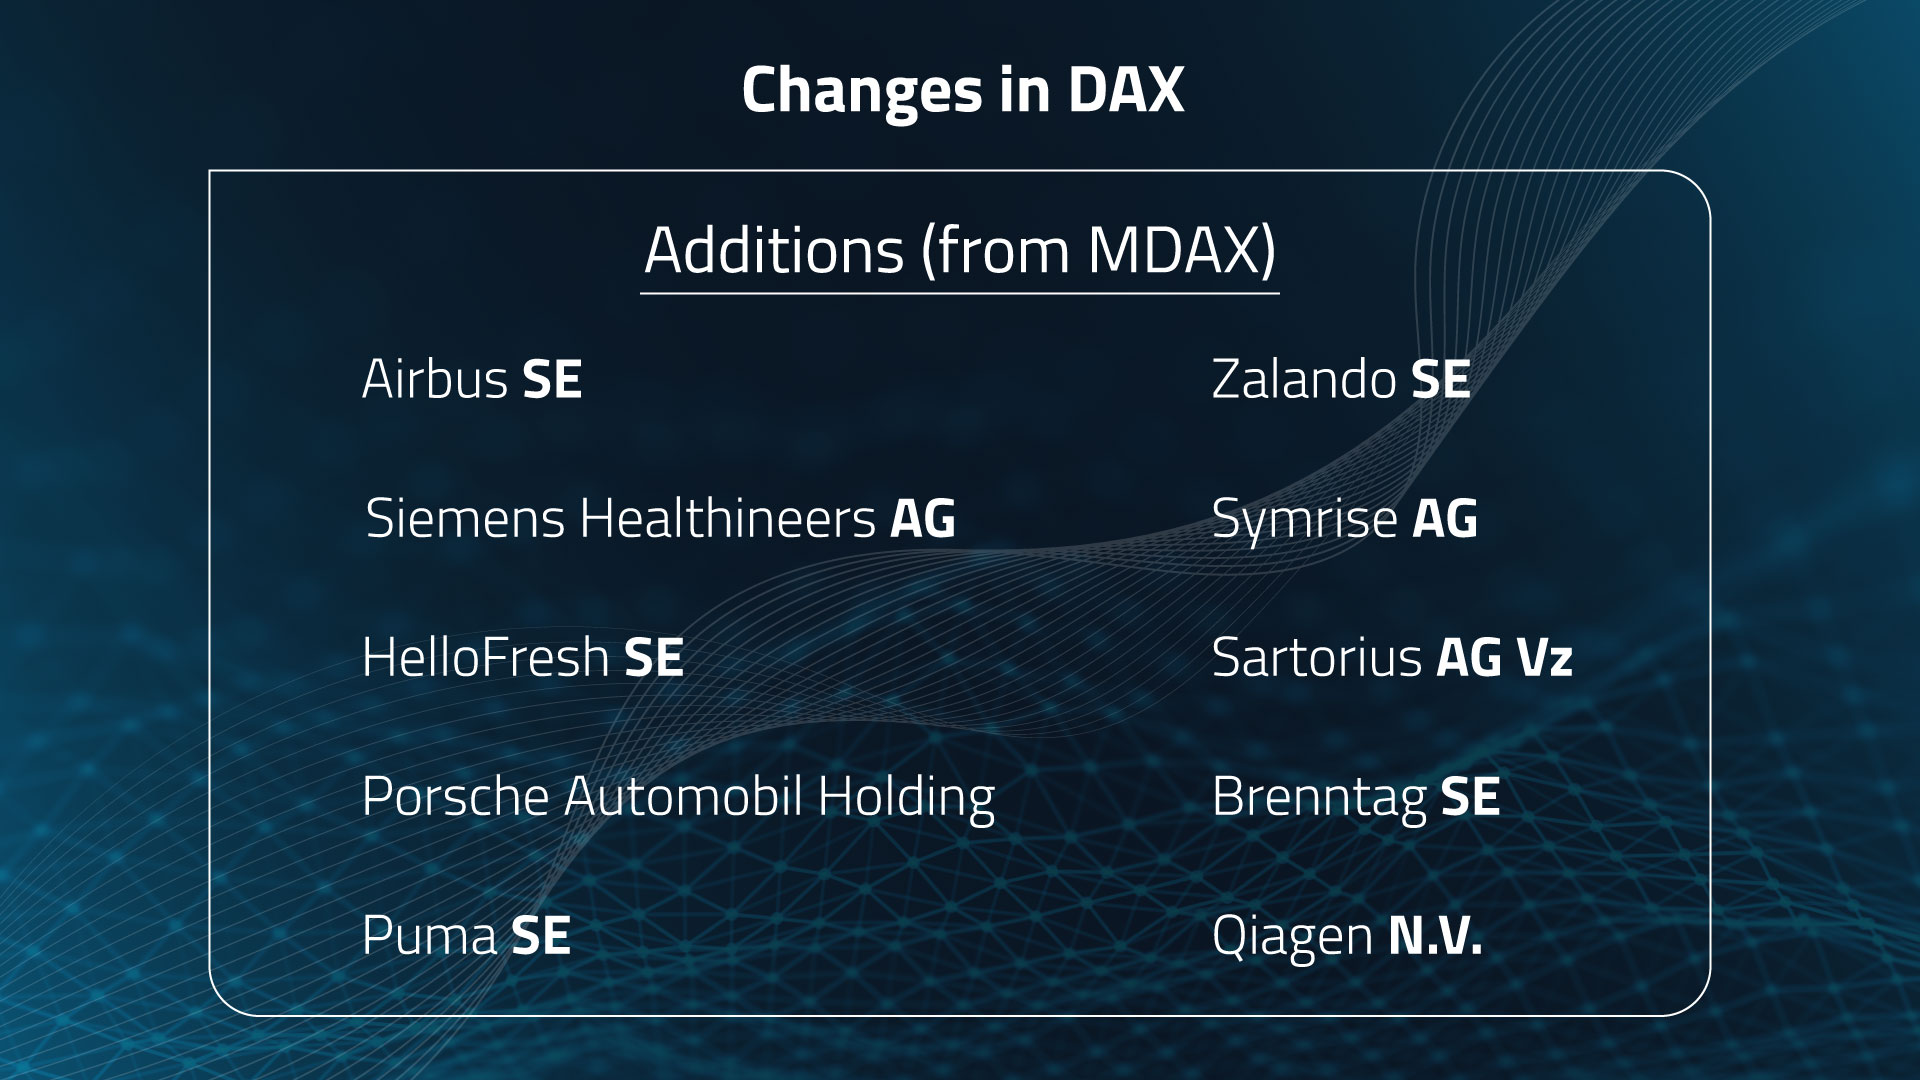 Germany’s DAX 30 Benchmark Expands to 40 Constituents, FP Markets